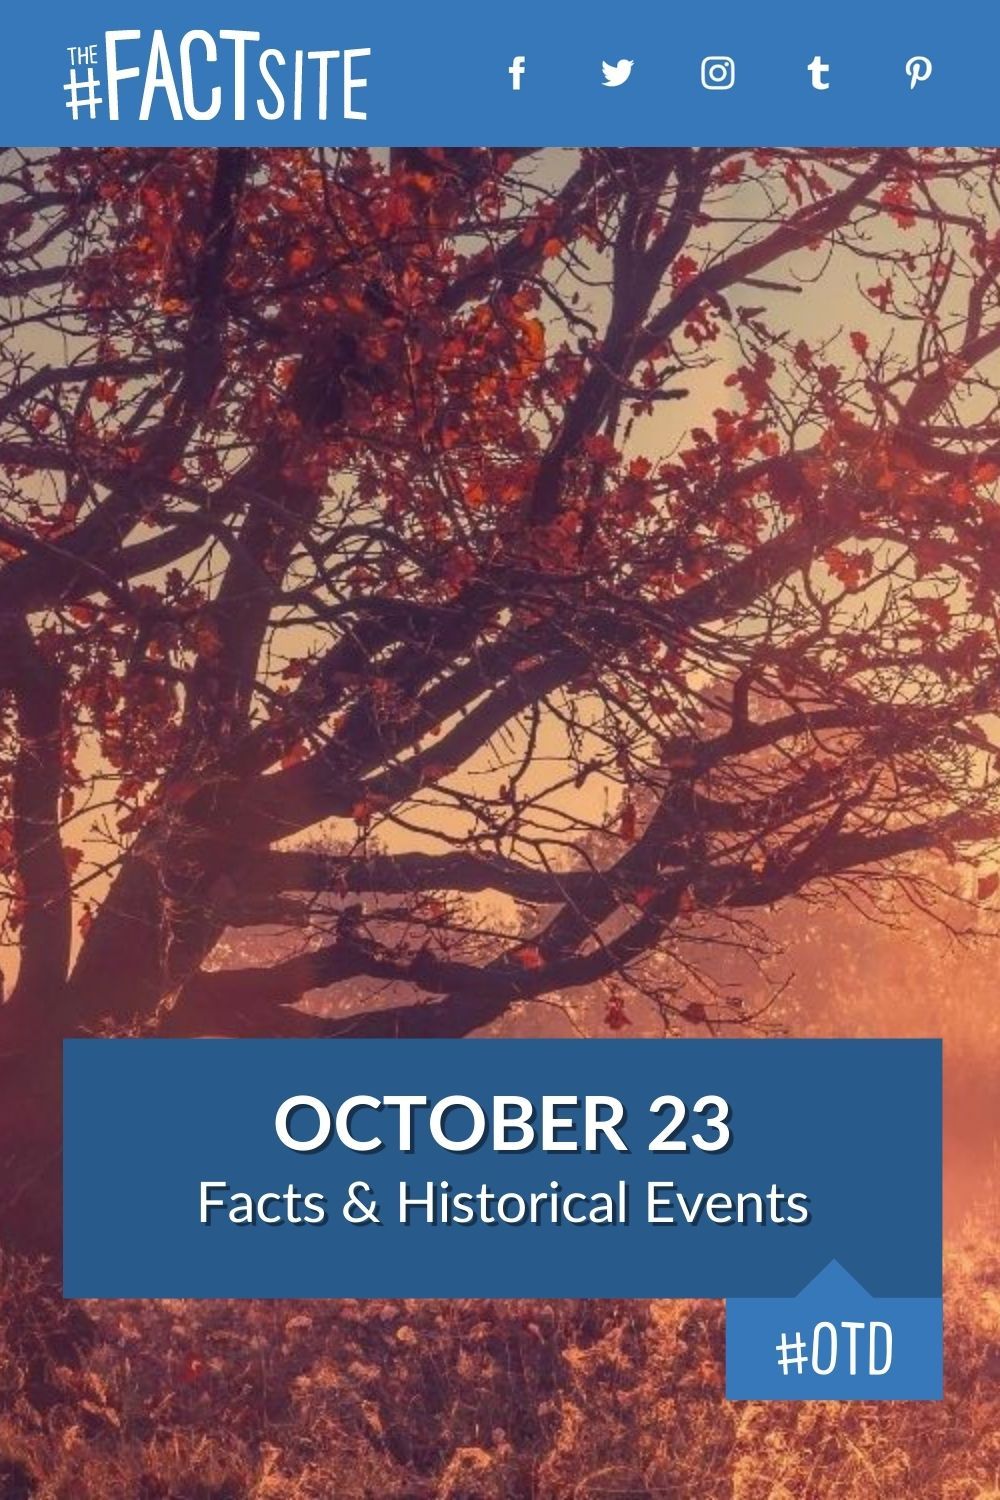 Facts & Historic Events That Happened on October 23